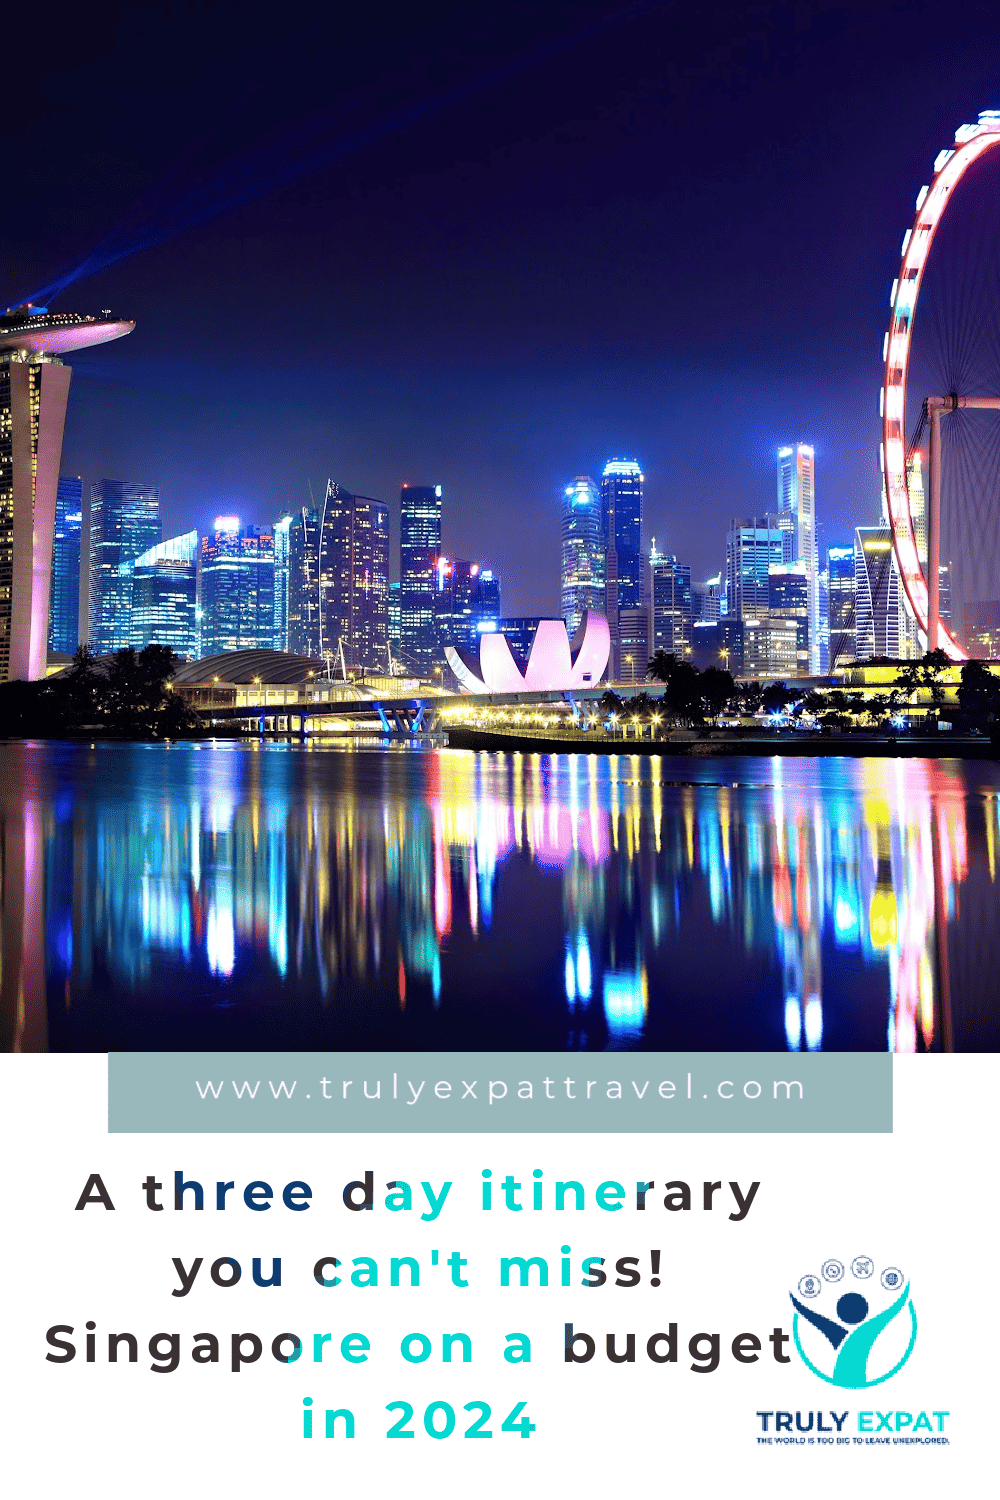 A three day itinerary you can't miss! Singapore on a budget in 2024